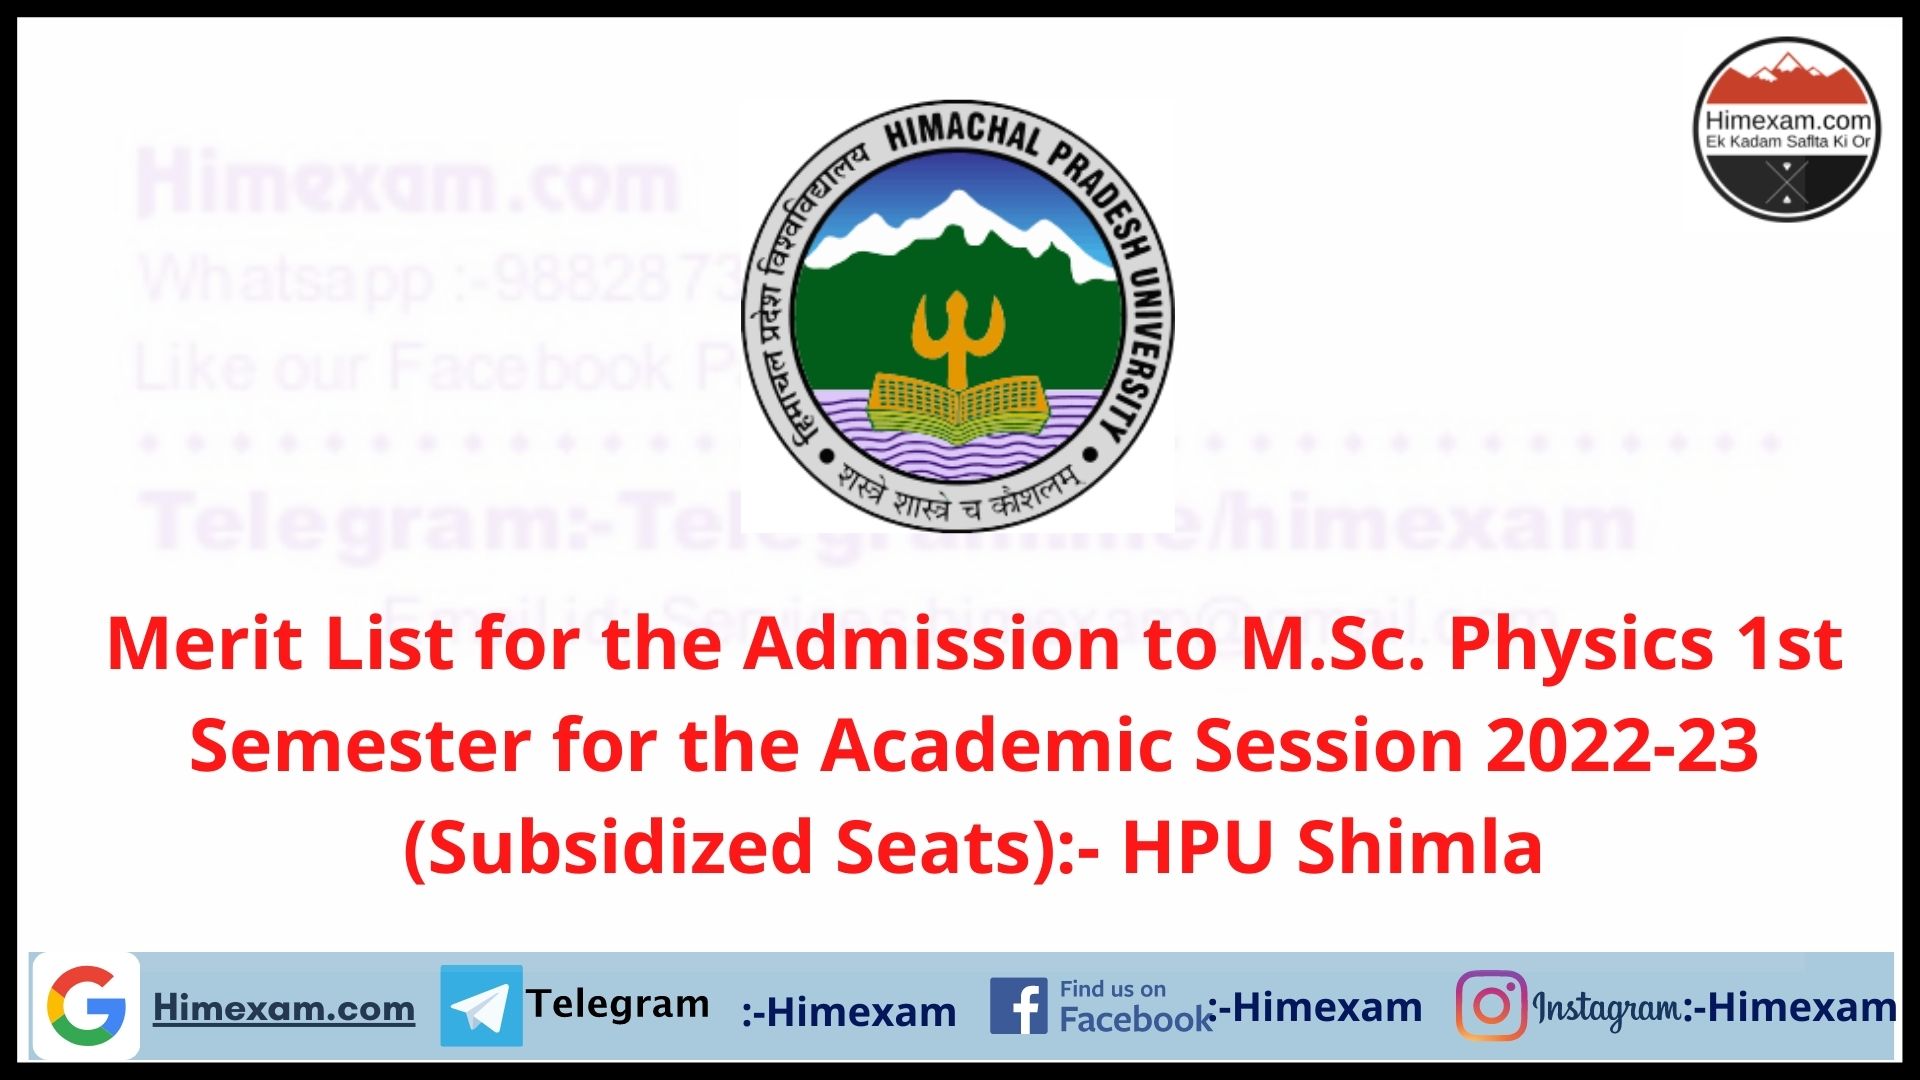 Merit List for the Admission to M.Sc. Physics 1st Semester for the Academic Session 2022-23 (Subsidized Seats):- HPU Shimla